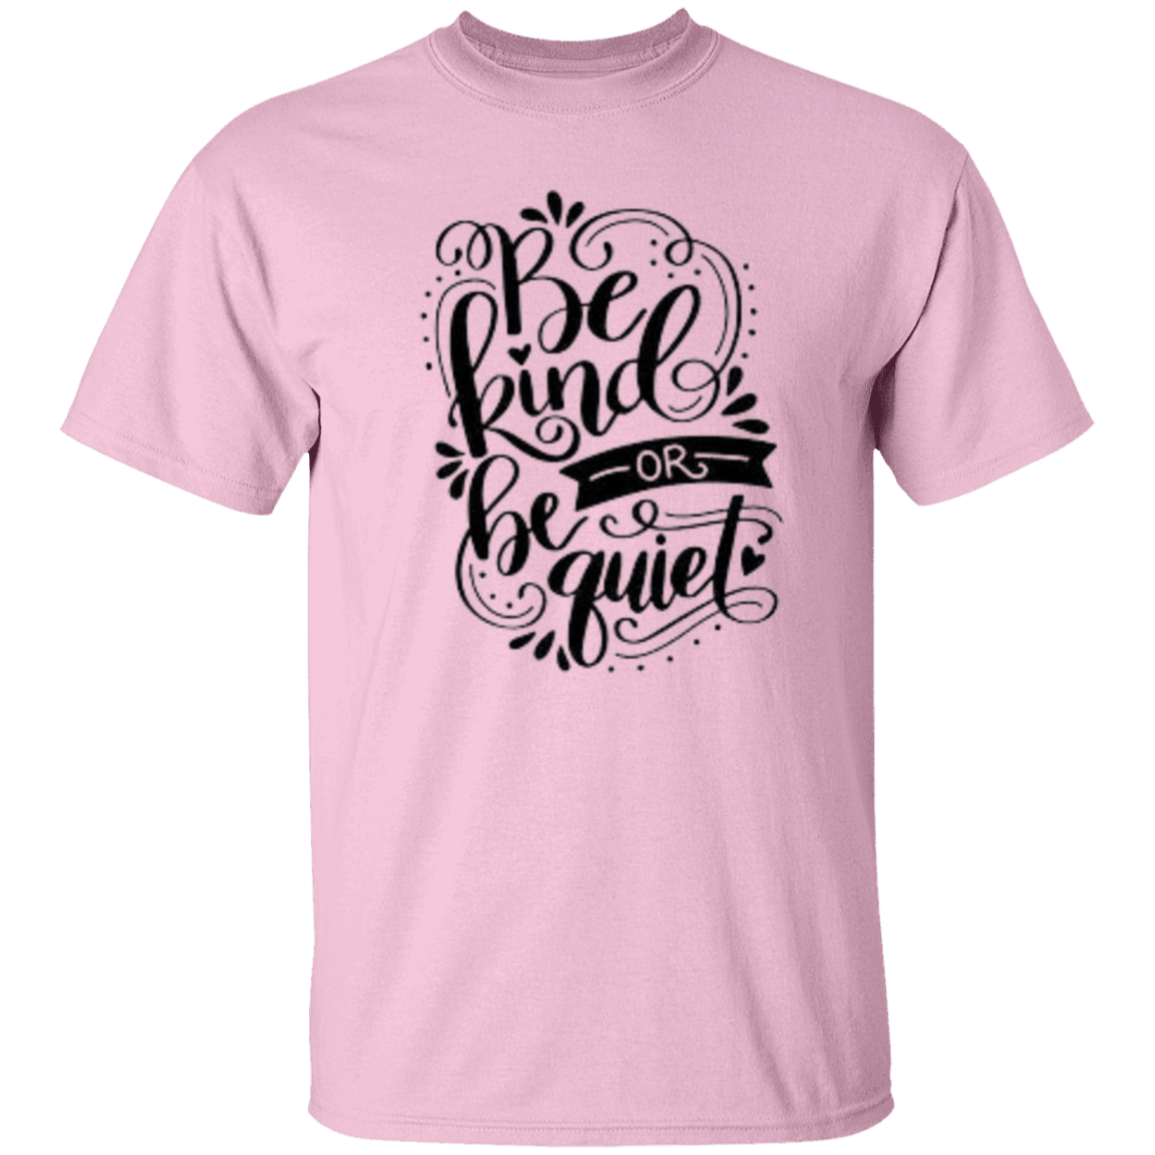 Be Kind Or Be Quiet T-Shirt, Kindness Shirt, Inspirational Shirt, Kind Shirt, Be Kind Shirt, Spread Kindness Shirt, Motivational Shirt, Shirts For Women